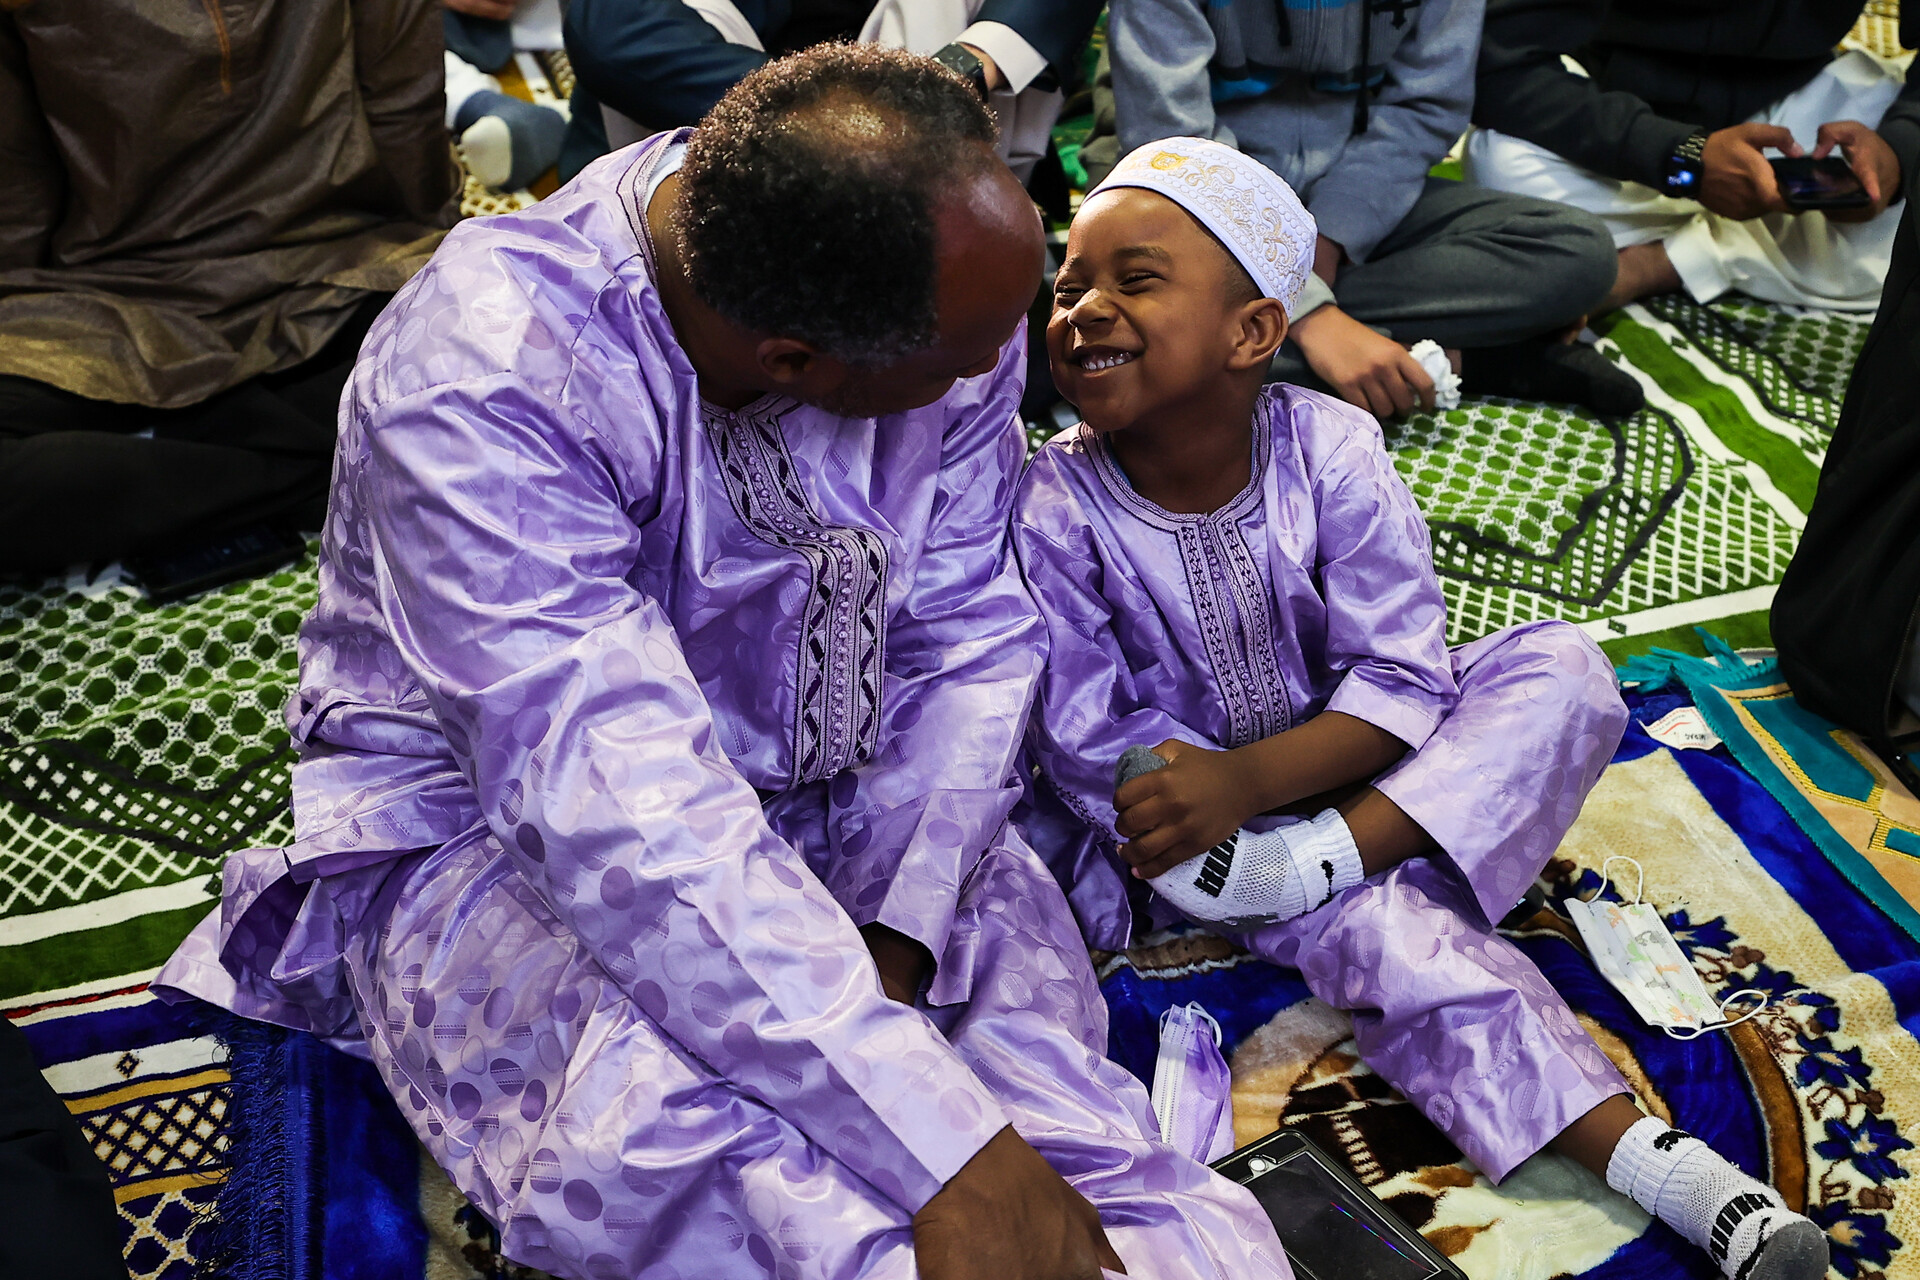 A man and a young boy, both with darker skin, wear traditional long sleeved purple shirts and pants, sitting down on a prayer mat. The boy is smiling broadly as the man looks down at him.